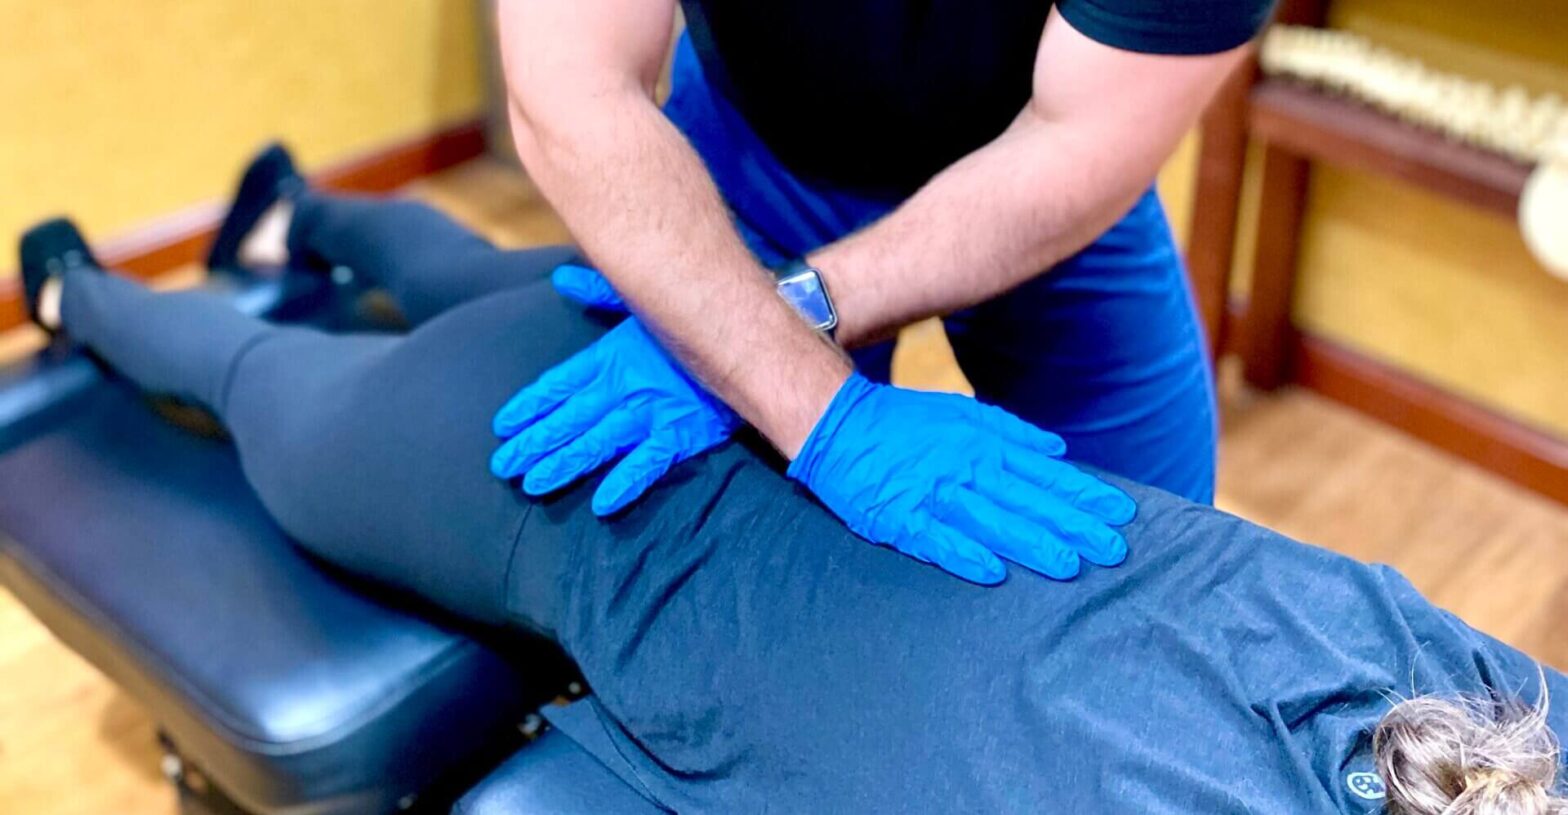 https://proclinix.com/wp-content/uploads/2020/09/Lifetime-Physical-Therapy-Chiropractic-Dr-John-Maloney-low-back-pain-3-scaled-e1692717922468-1568x815.jpg